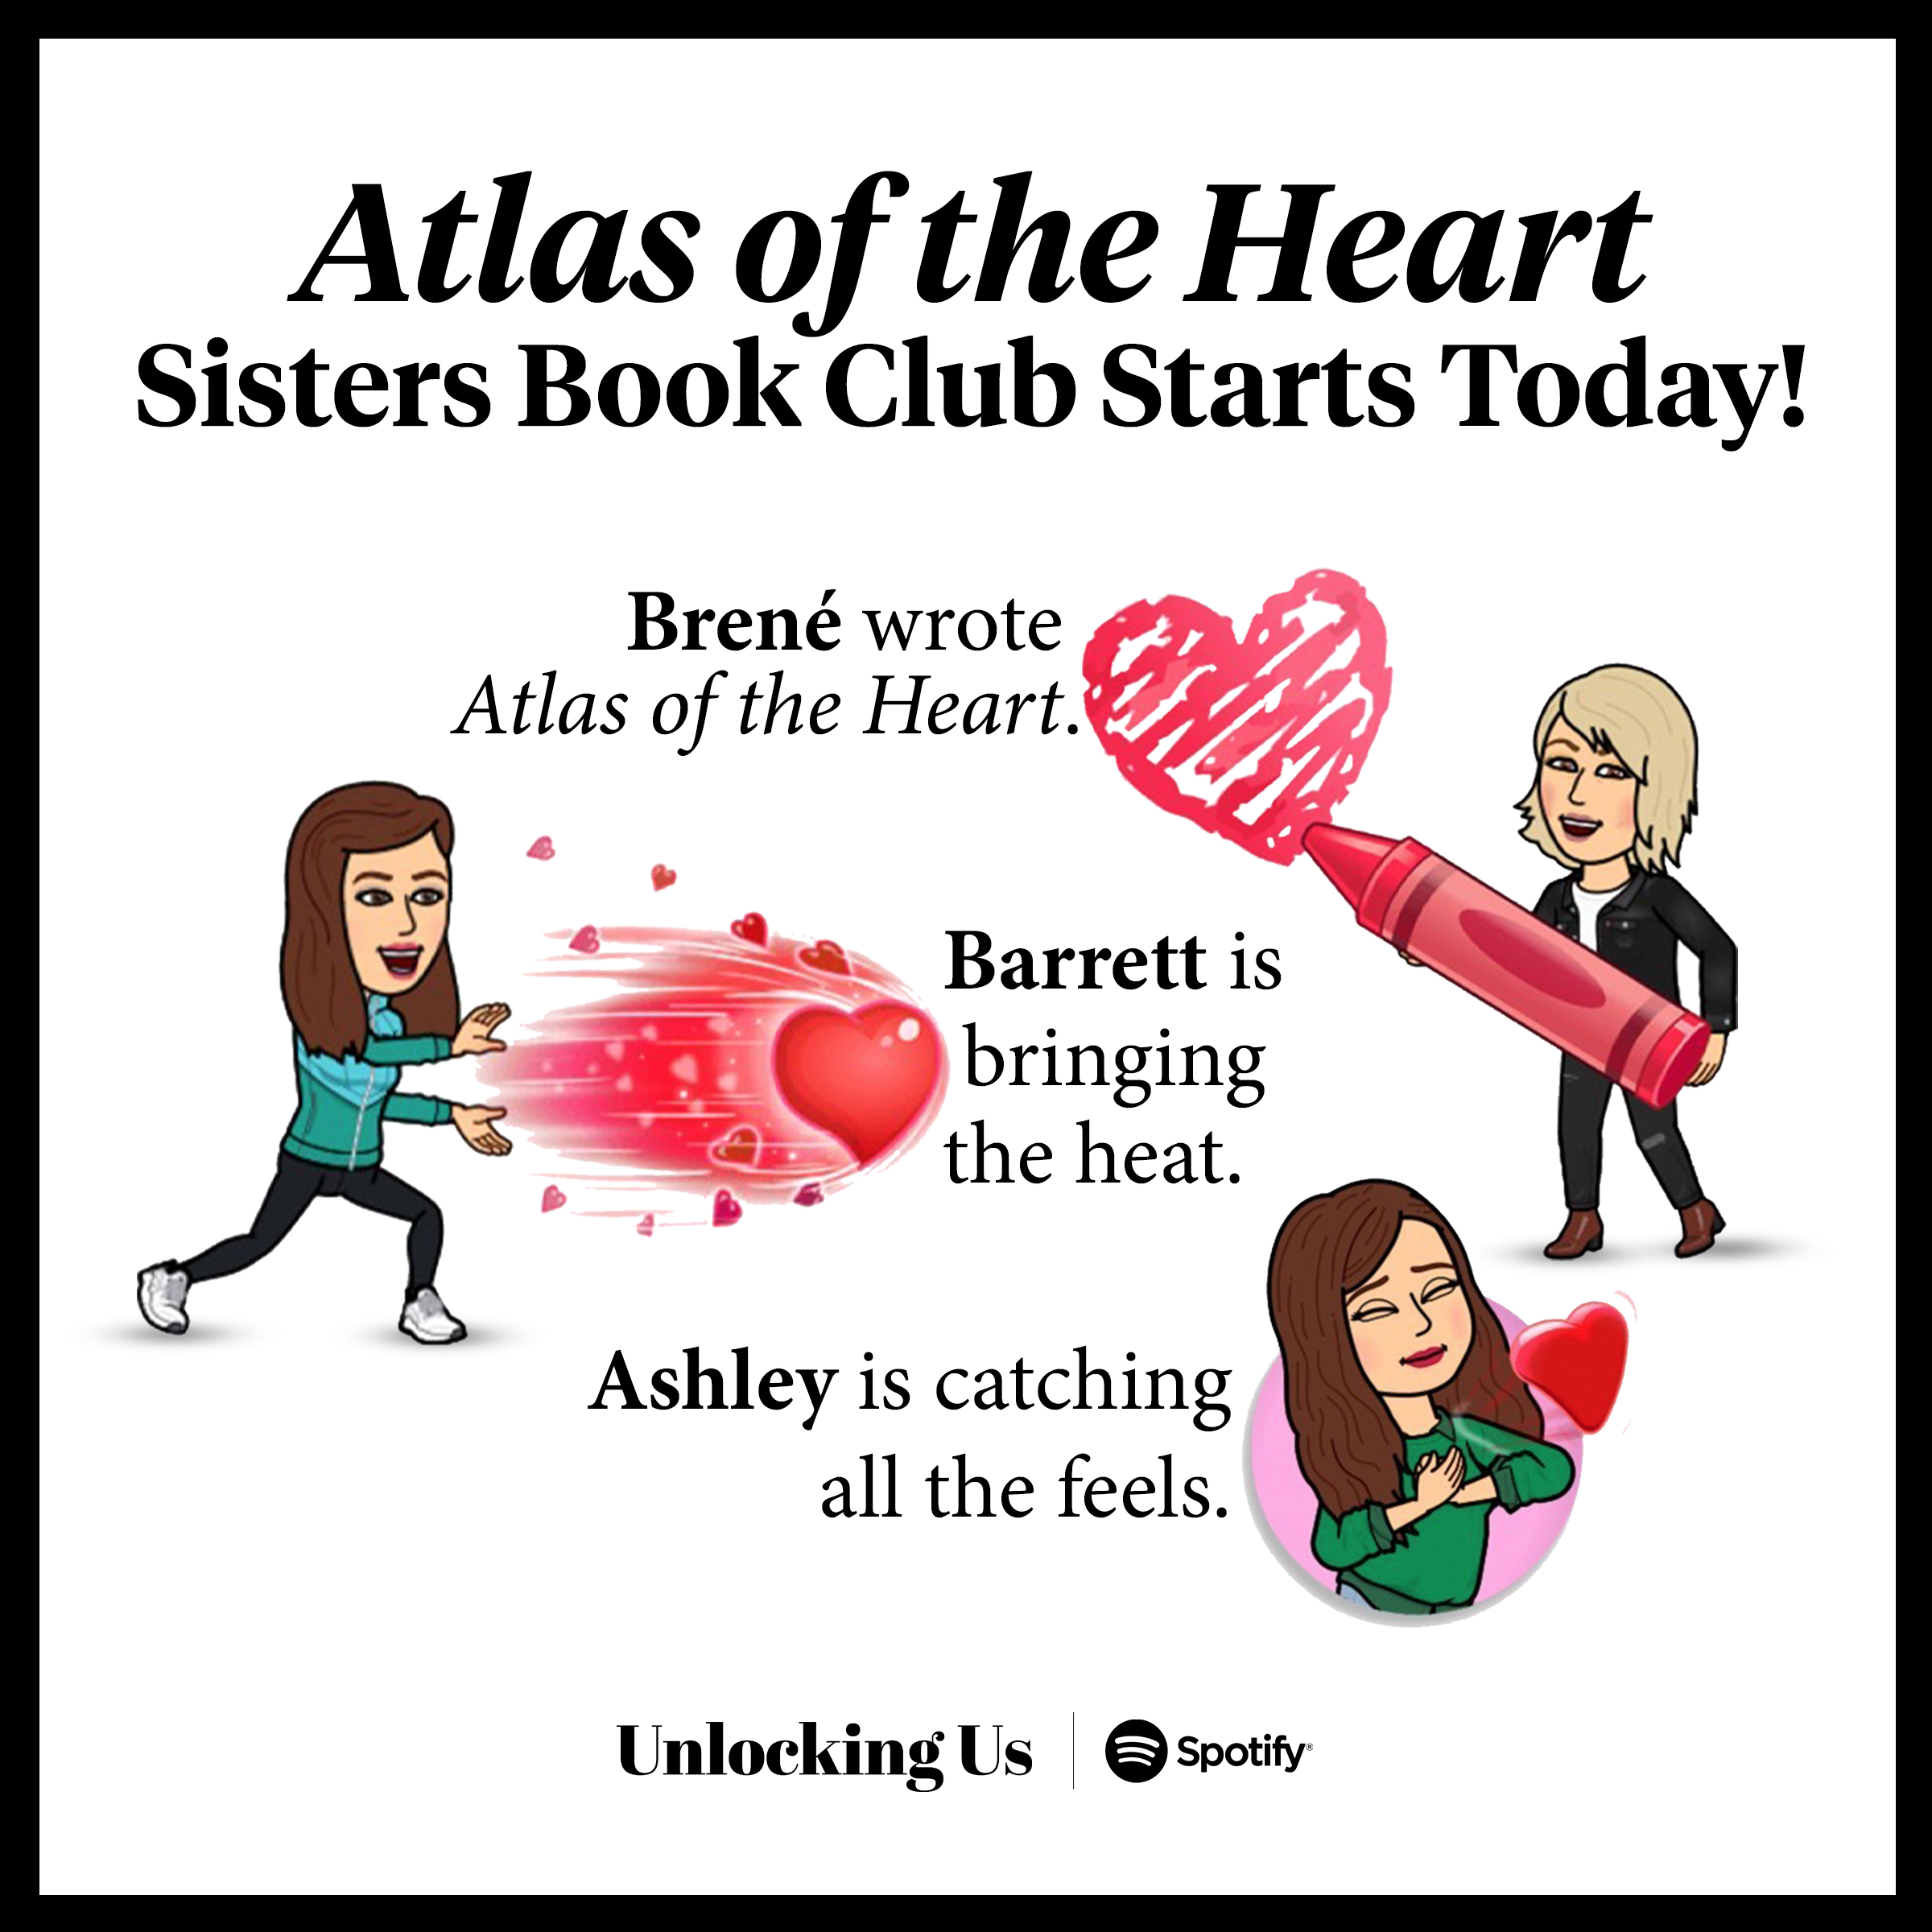 Atlas of the Heart Sister Book Club Starts Today! Brene wrote Atlas of the Heart. Barrett is bringing the heat. Ashley is caching all the feels. Now on Unlocking Us on Spotify.